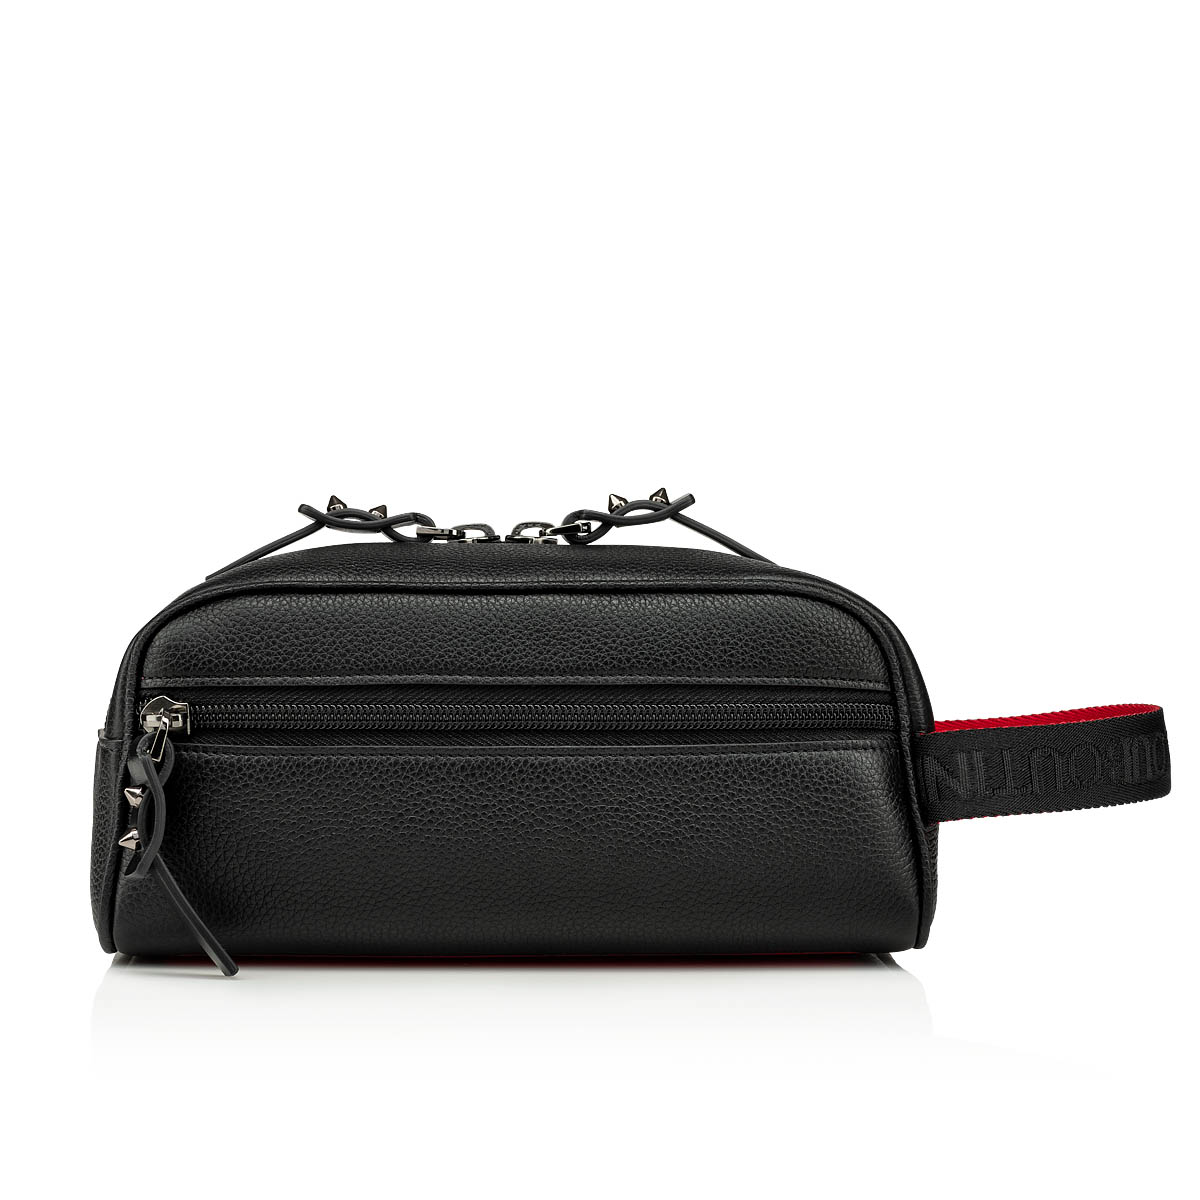 Shop Christian Louboutin Blaster Street Style Leather Bags by